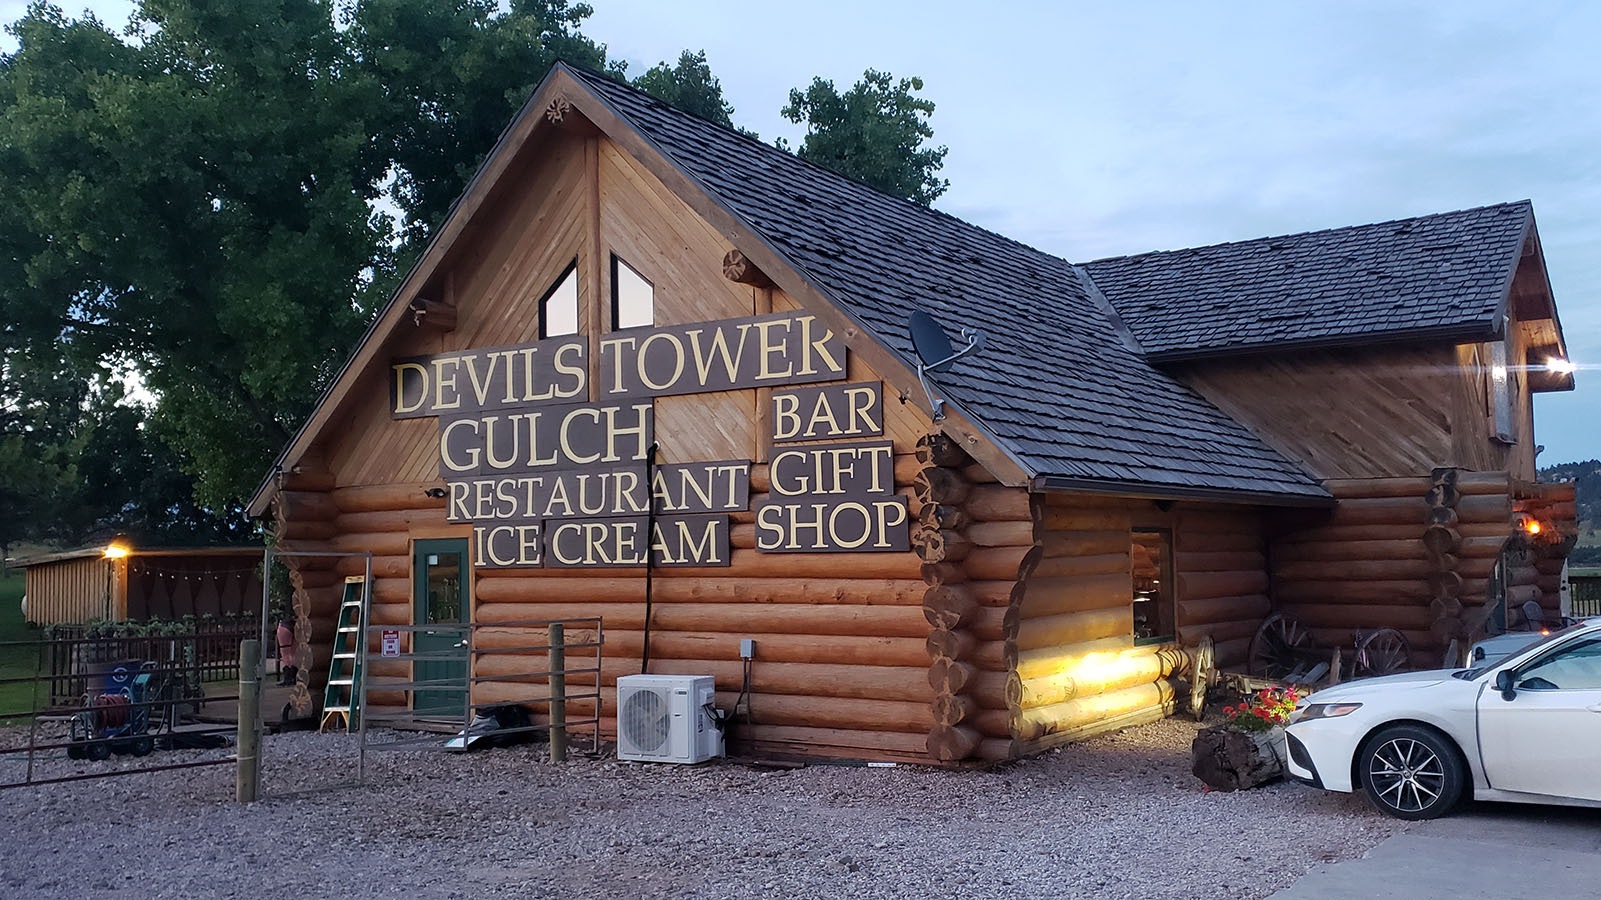 There's no way visitors can't see the Devils Tower Gulch restaurant from a long way off.